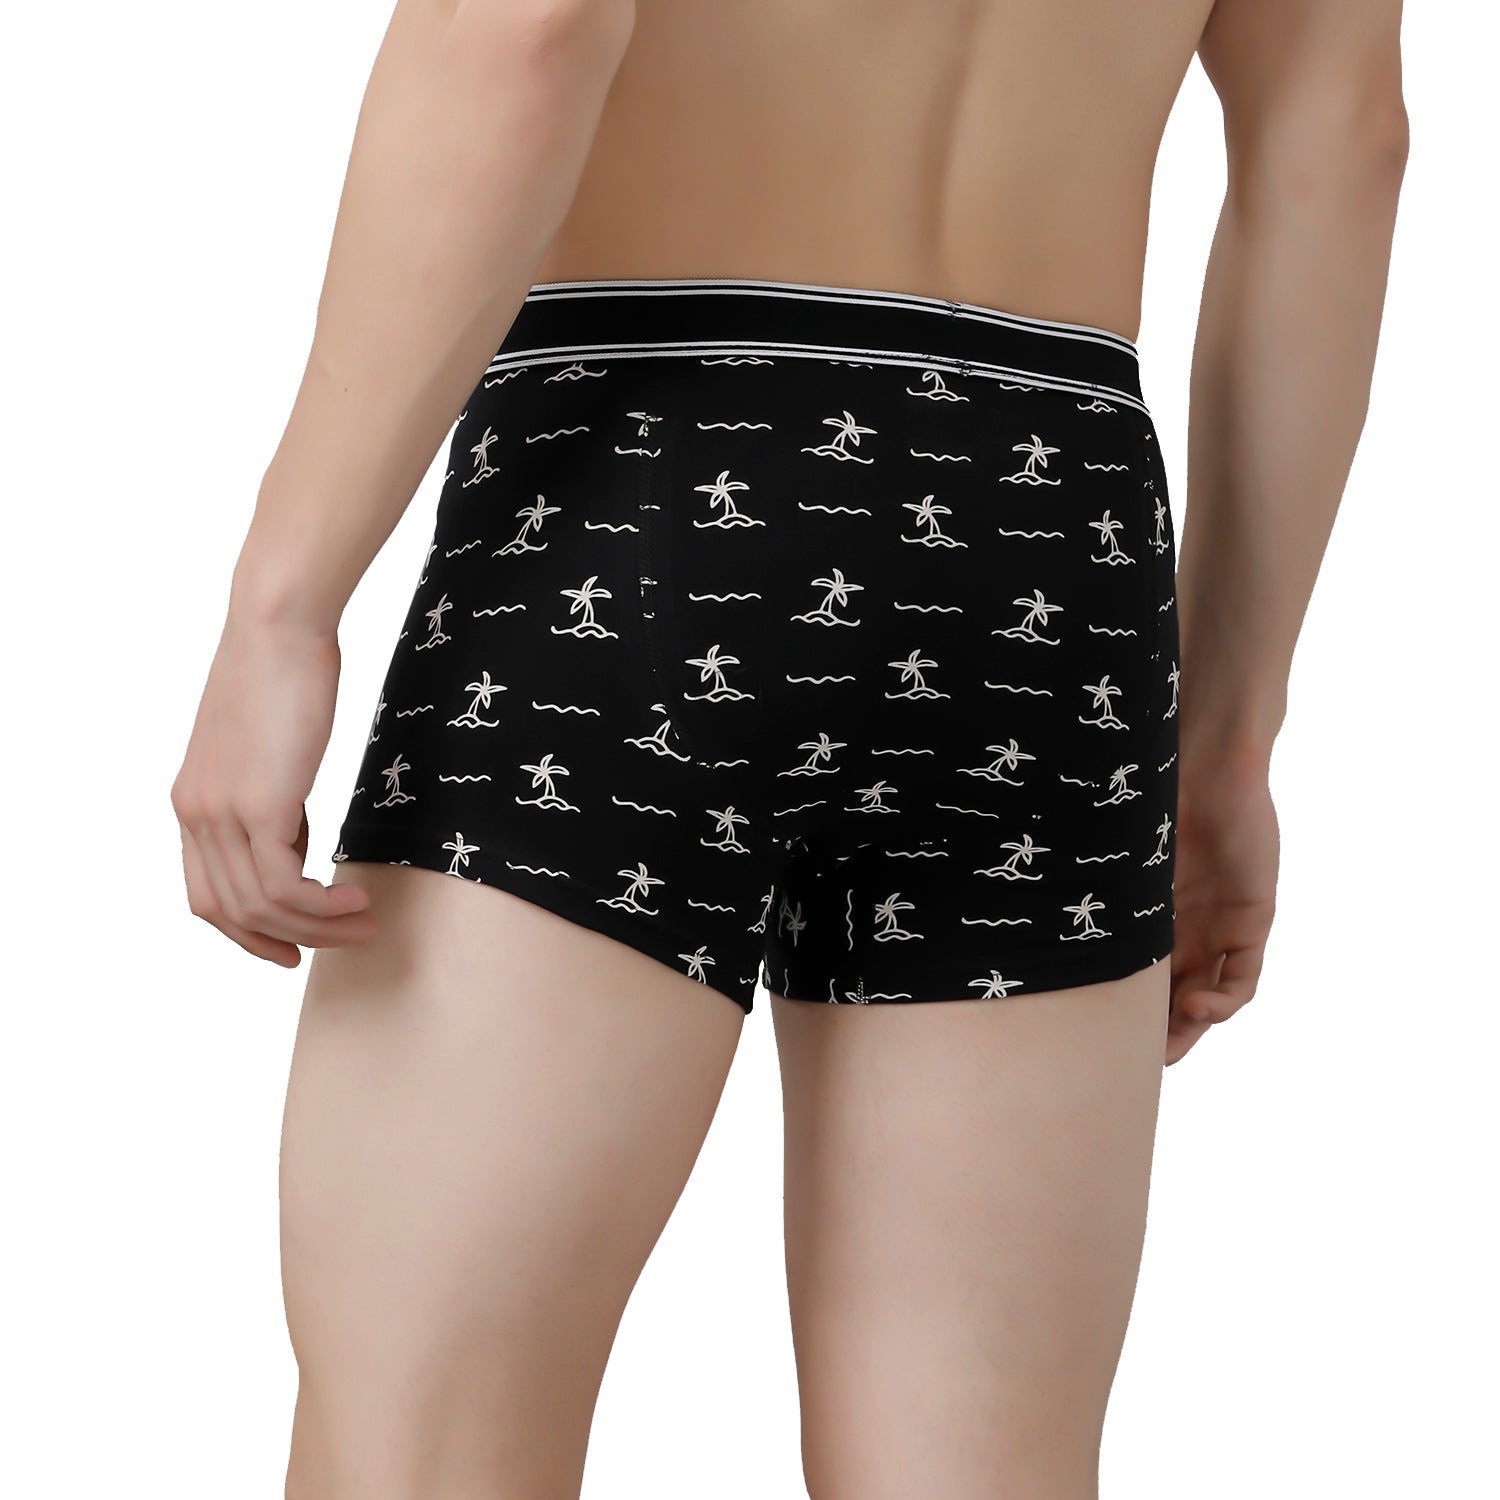 Buy CP BRO Printed Briefs with Exposed Waistband Value Pack - Black Stripe  & Blue Leaf (Pack of 2) at